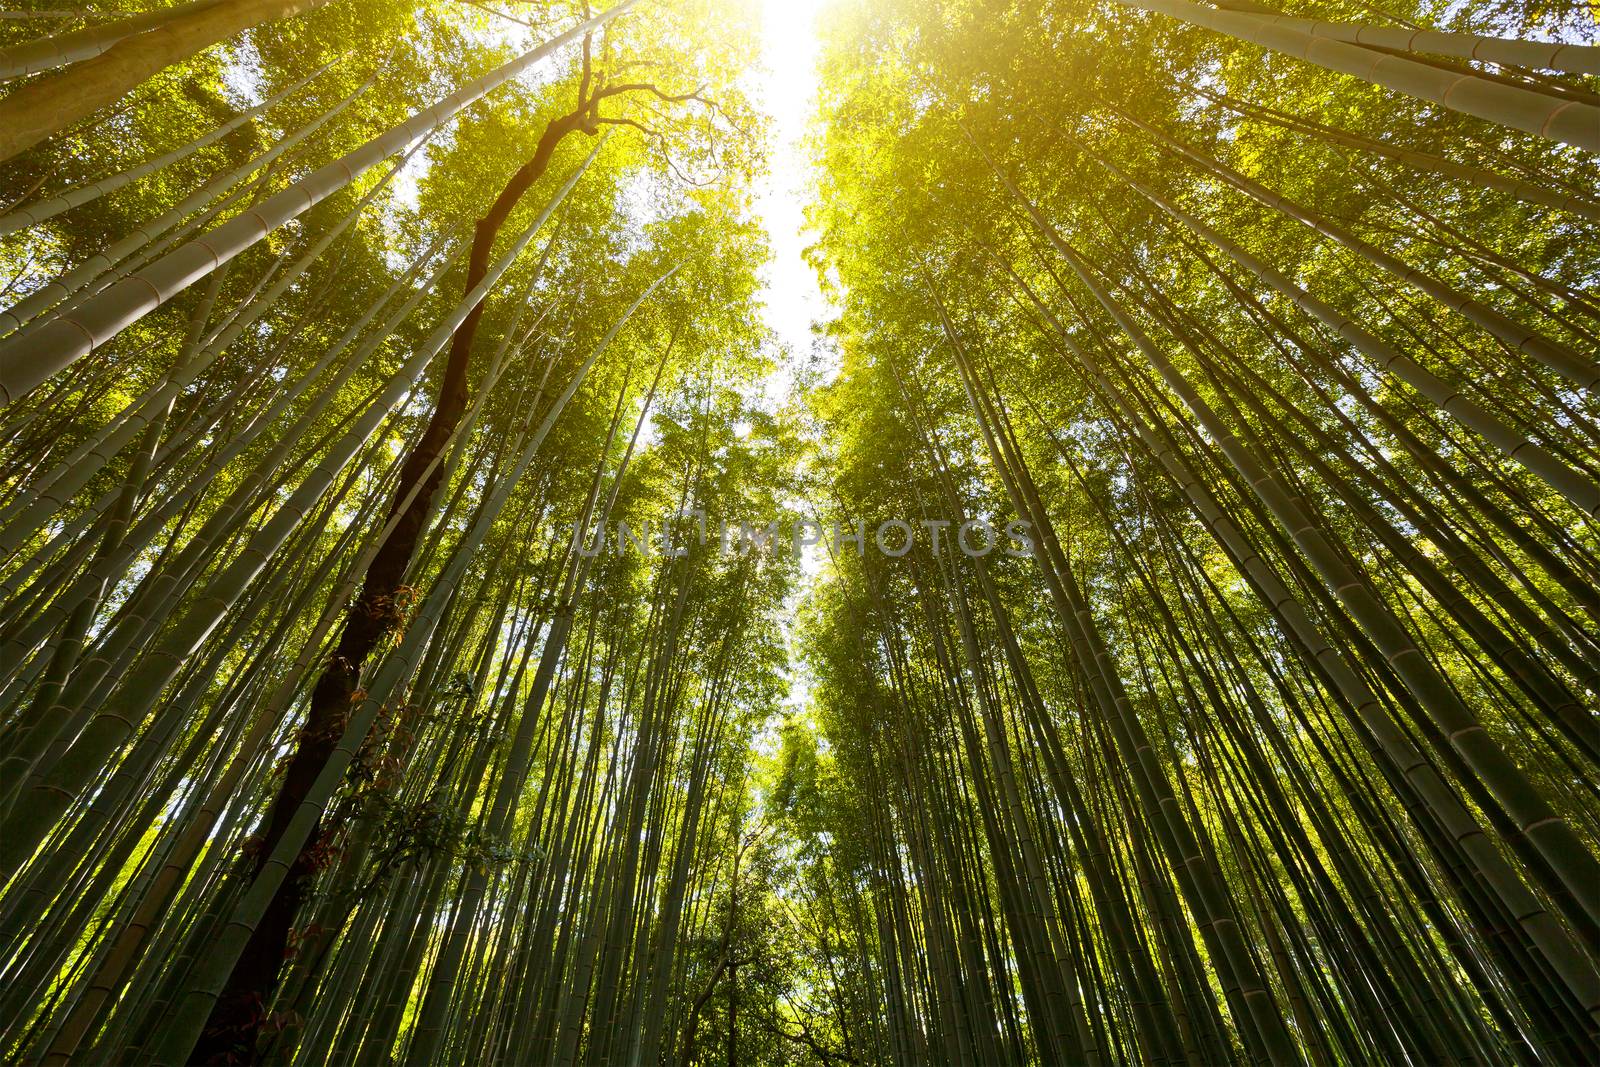 The flourish bamboo forest with glorious morning sunshine by kawing921